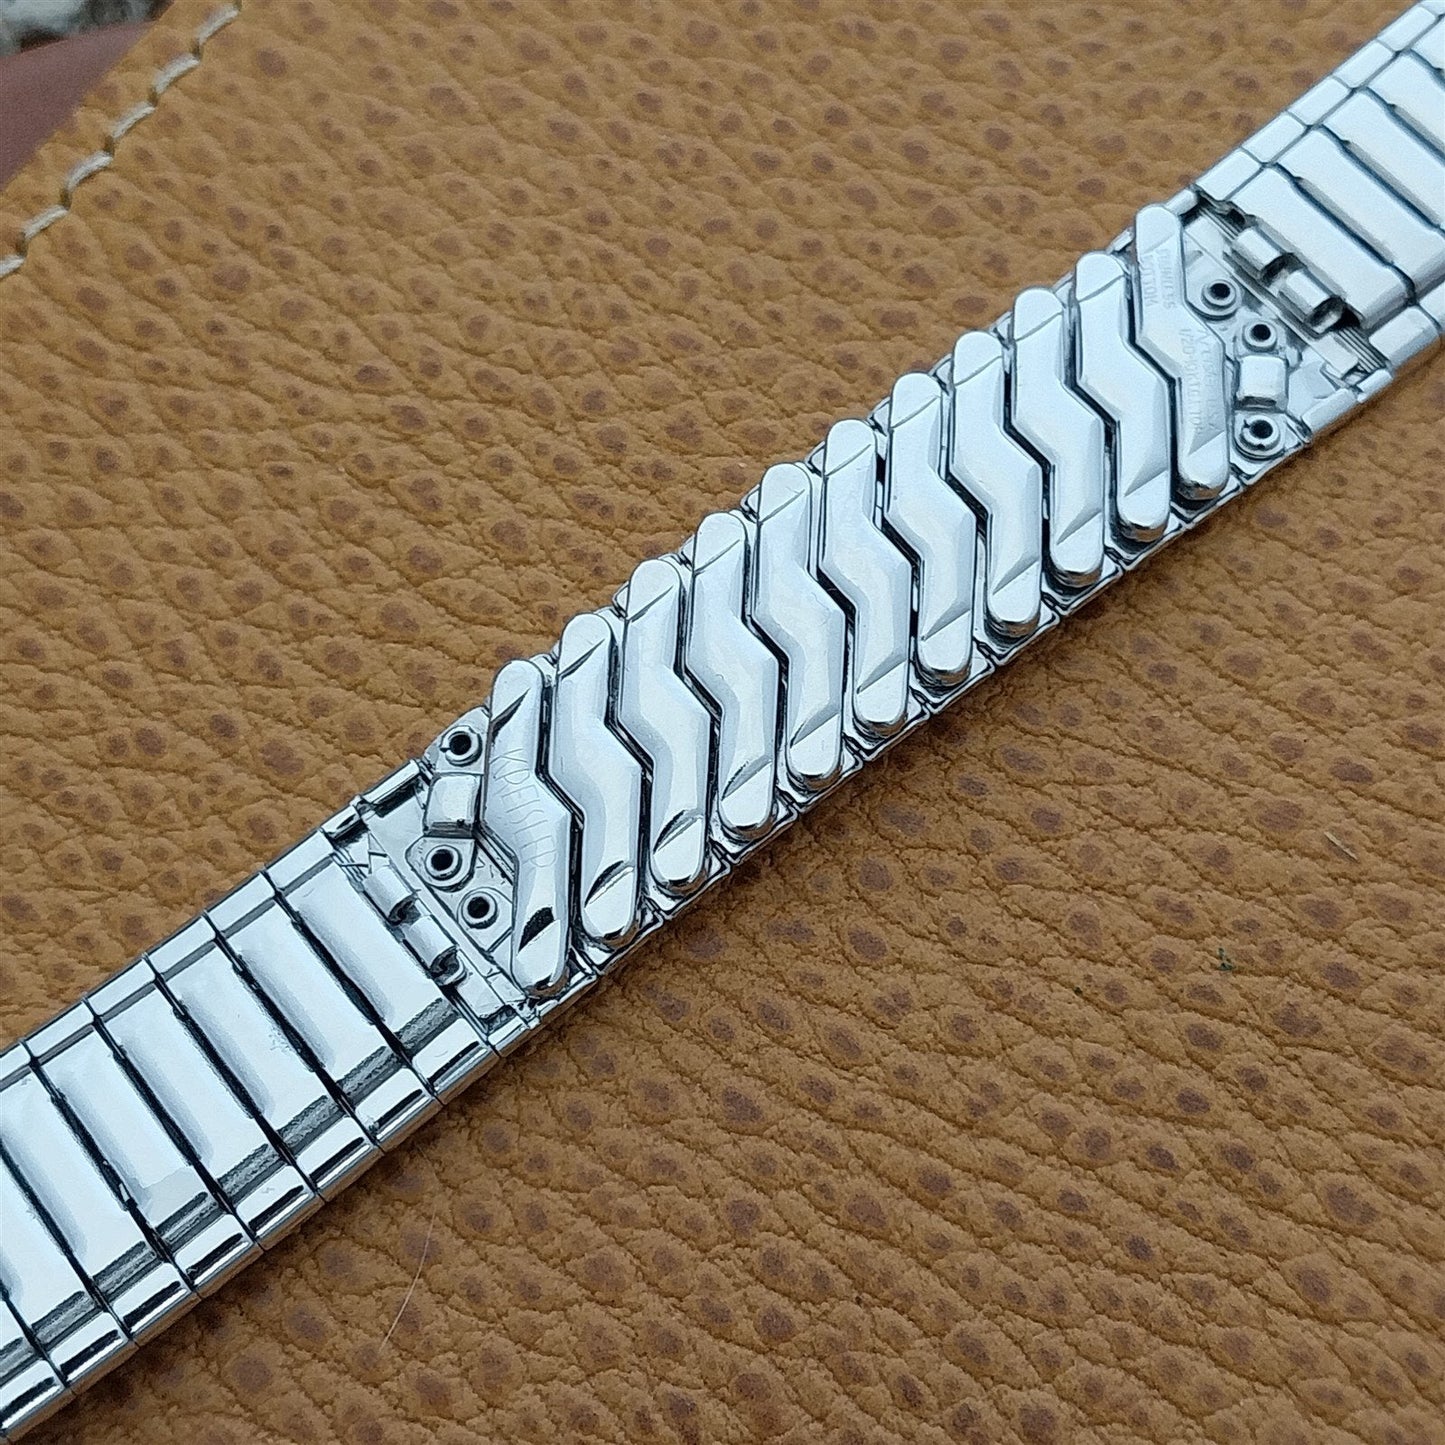 18mm 19mm White Gold-Filled Classic Kreisler USA nos 1960s Vintage Watch Band